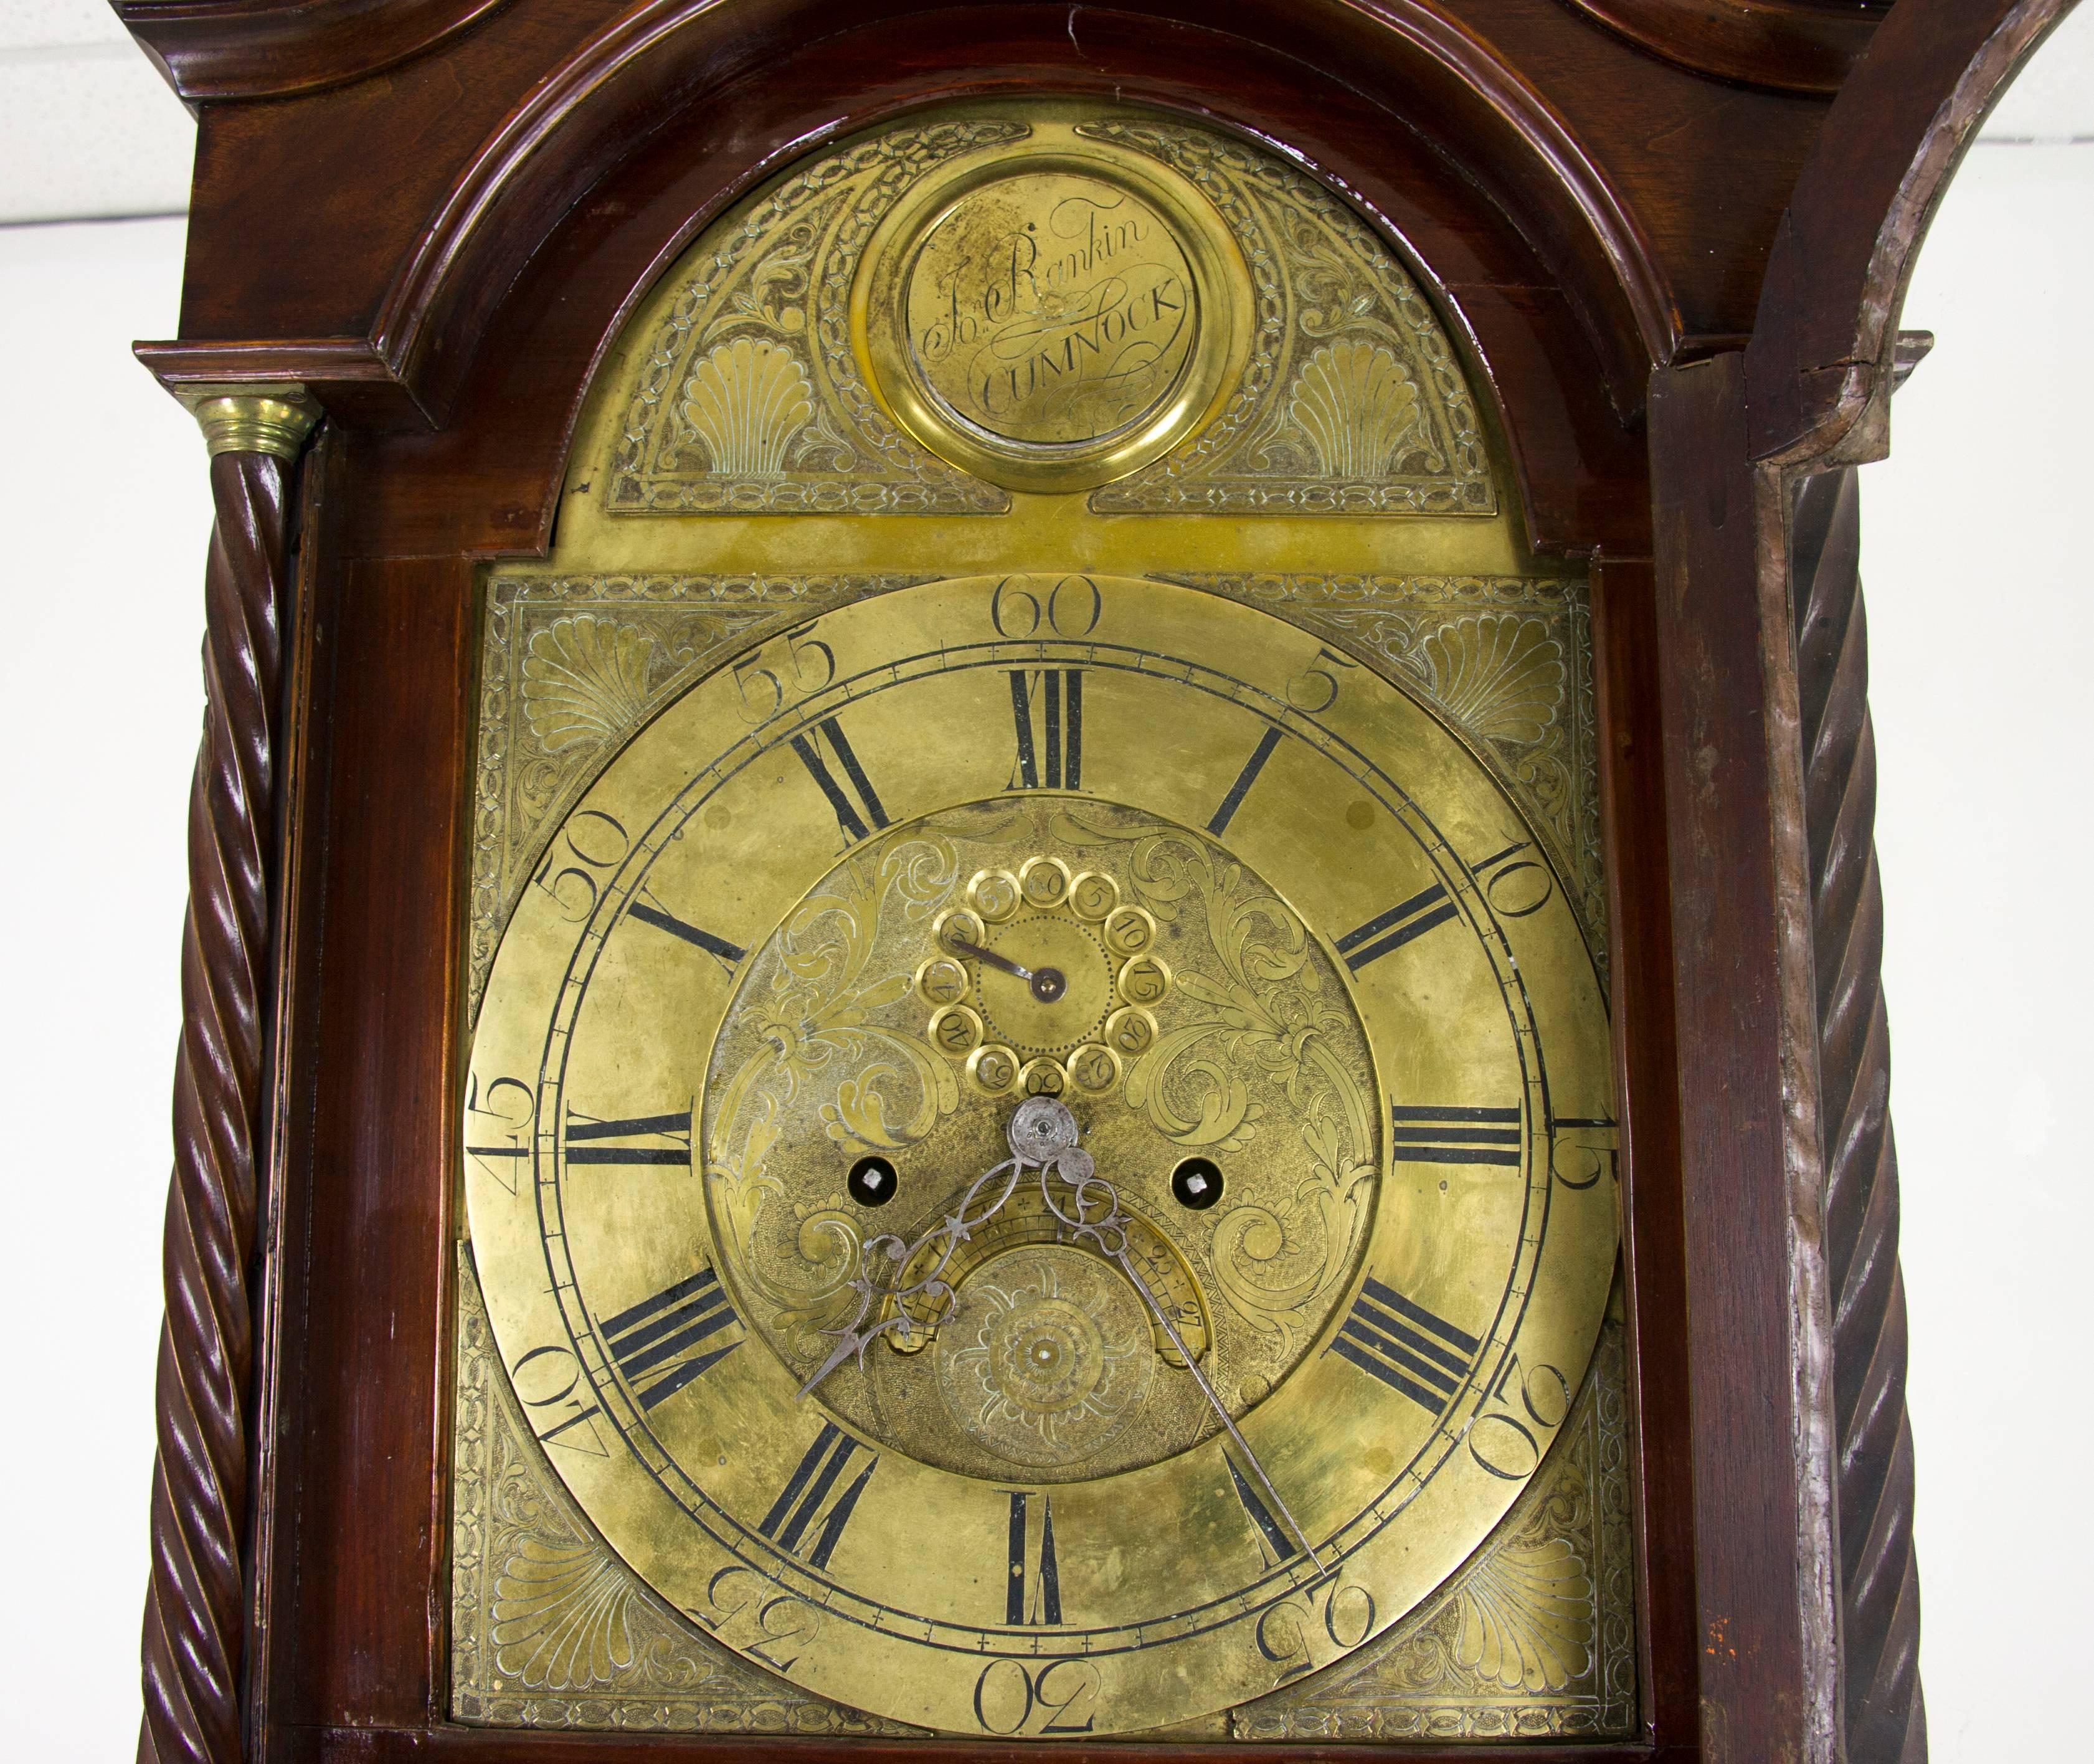 Antique Long Case Clock, Grandfather Clock, Inlaid, Mahogany, John Rankin, Old Cummock, Antique Furniture, B726

Slim Line Mahogany Long Case Clock
Georgian Design
Swan Neck Pediment
Brass Dial with Second Hand
8 Day Movement, strikes on a Bell on